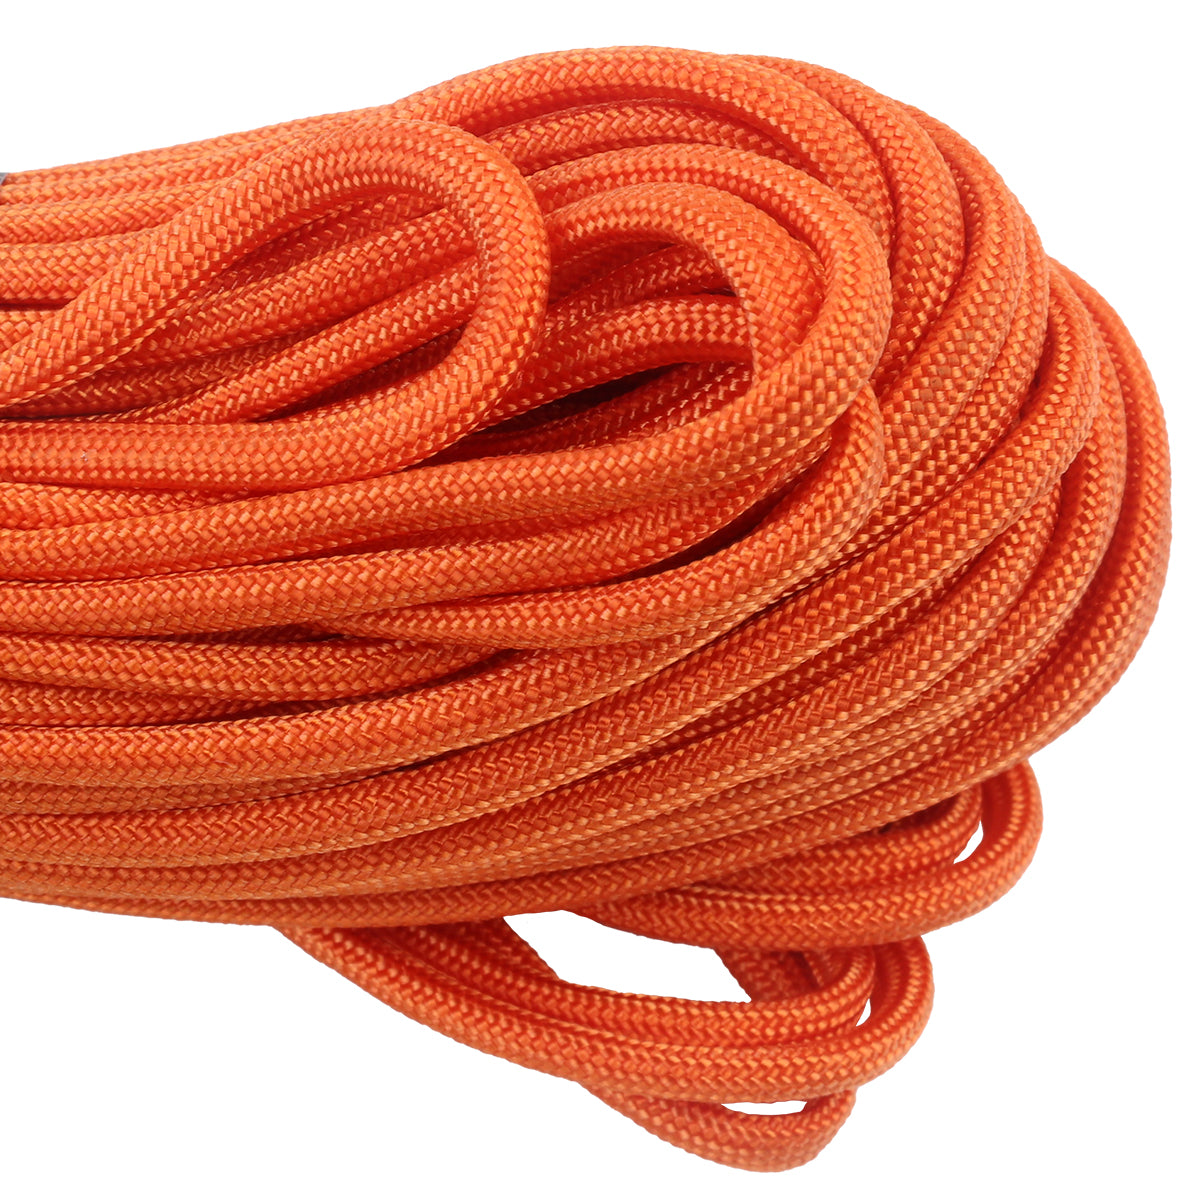 Solar Orange 100 Feet 425 Paracord for Paracord Crafts Made in the